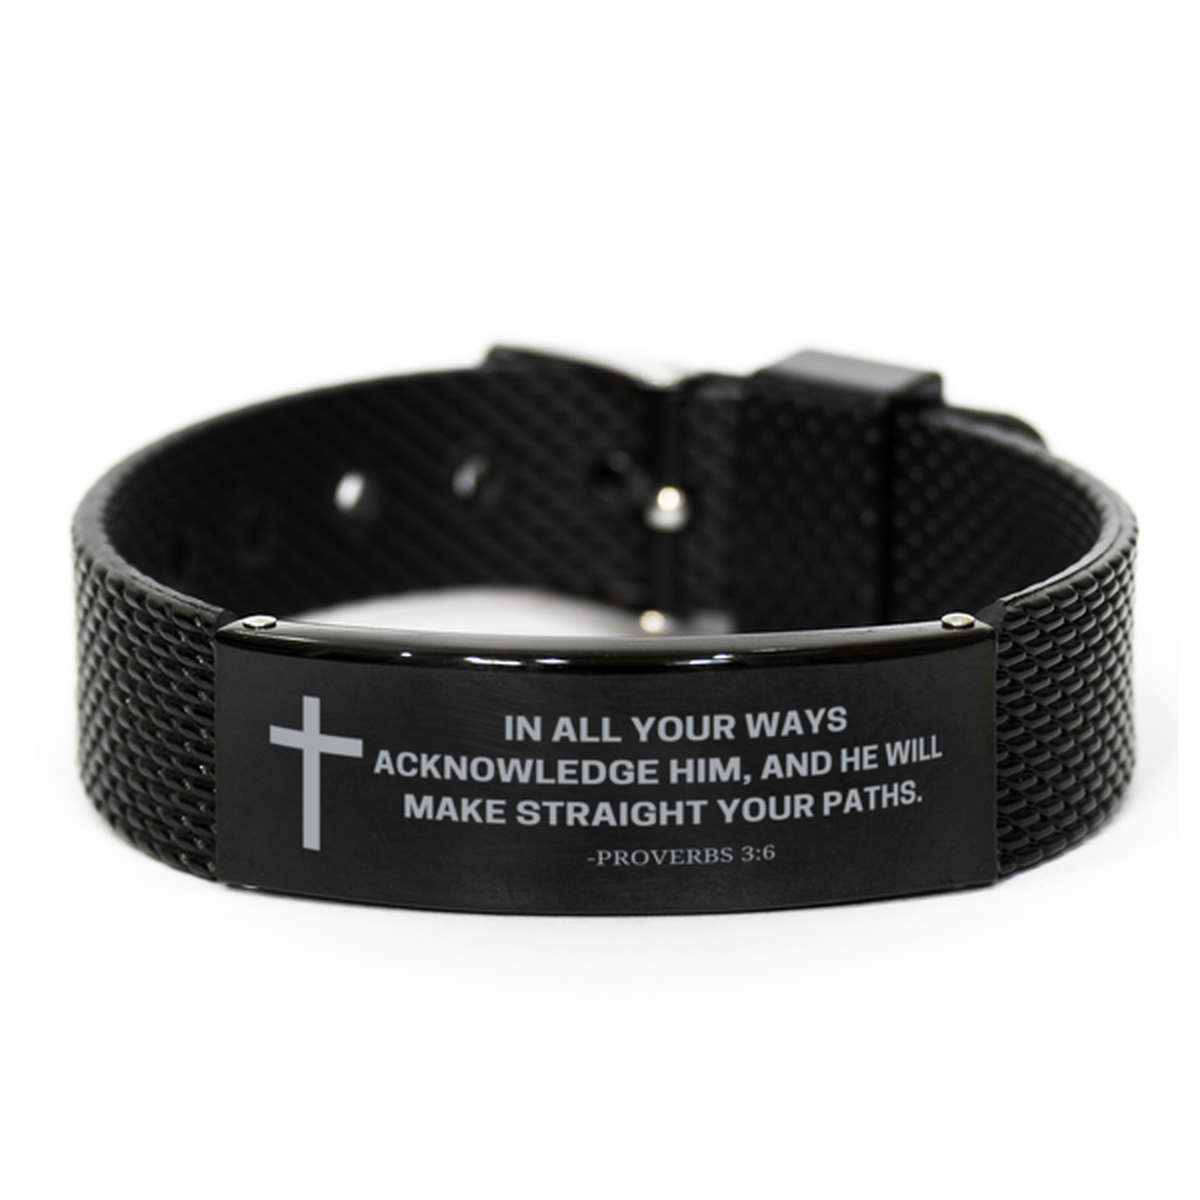 Baptism Gifts For Teenage Boys Girls, Christian Bible Verse Black Shark Mesh Bracelet, In all your ways acknowledge Him, Catholic Confirmation Gifts for Son, Godson, Grandson, Nephew